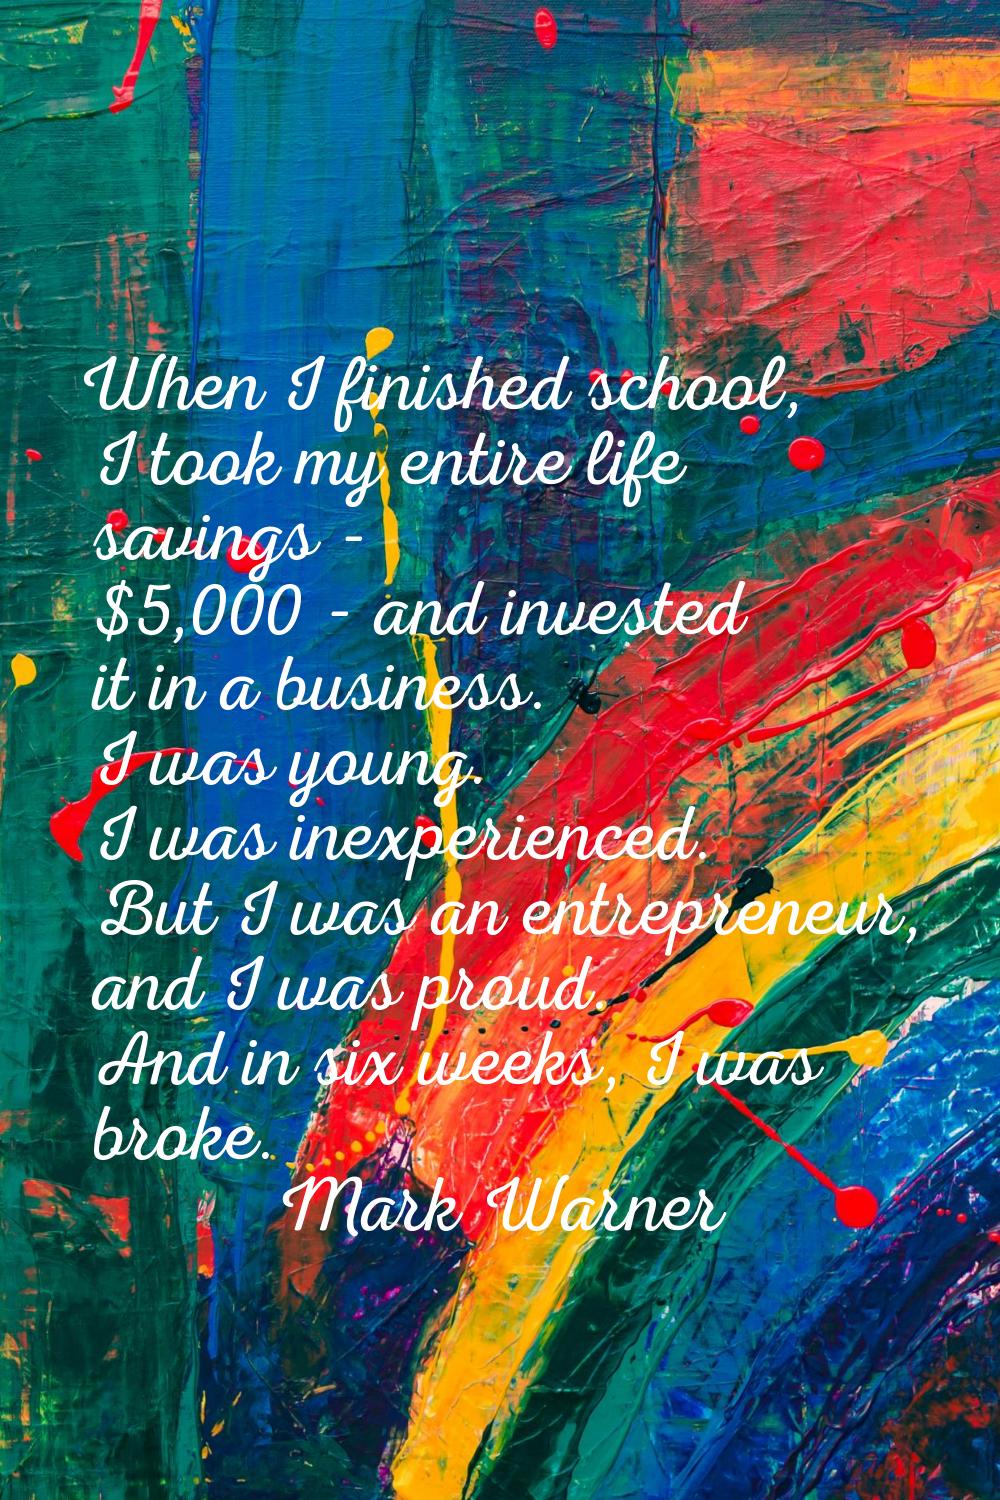 When I finished school, I took my entire life savings - $5,000 - and invested it in a business. I w